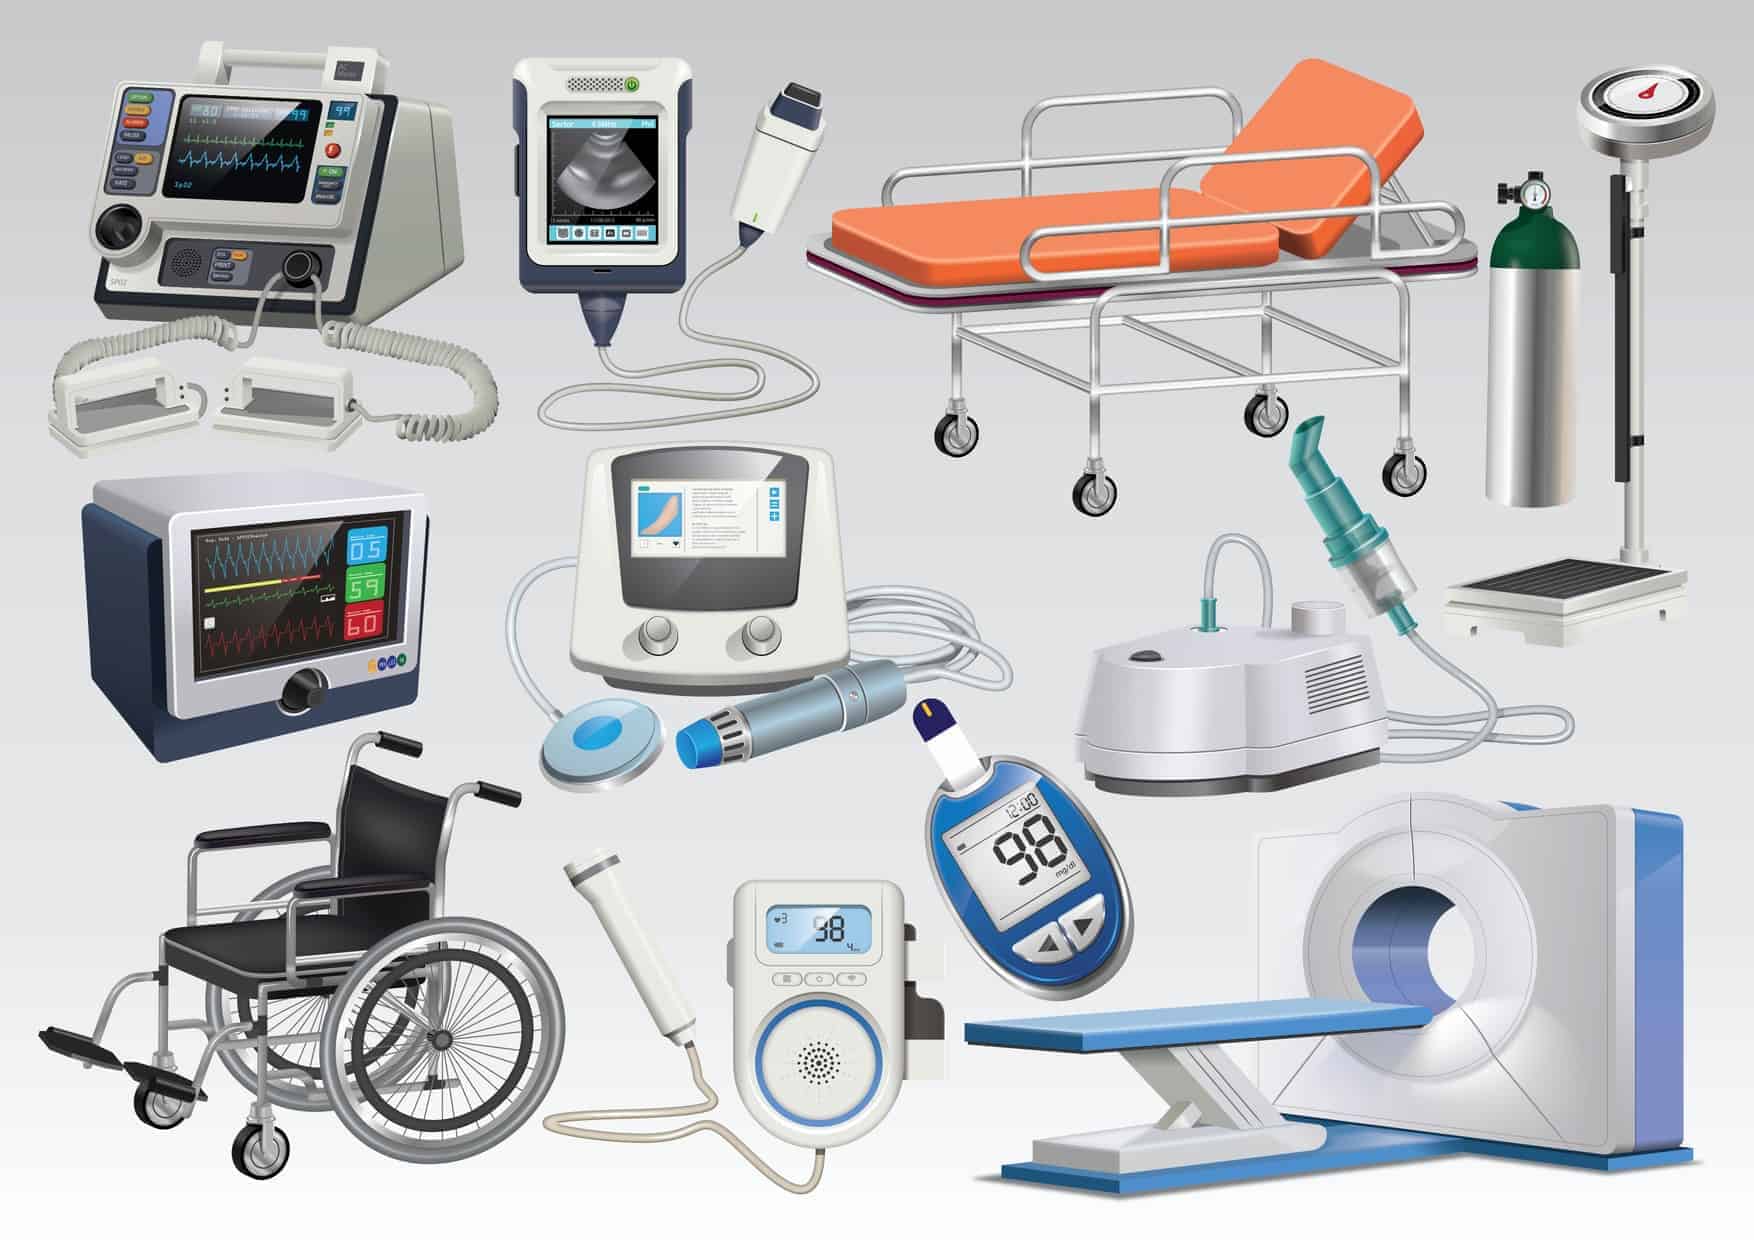 How Do You Know Home Medical Equipment Is Certified?